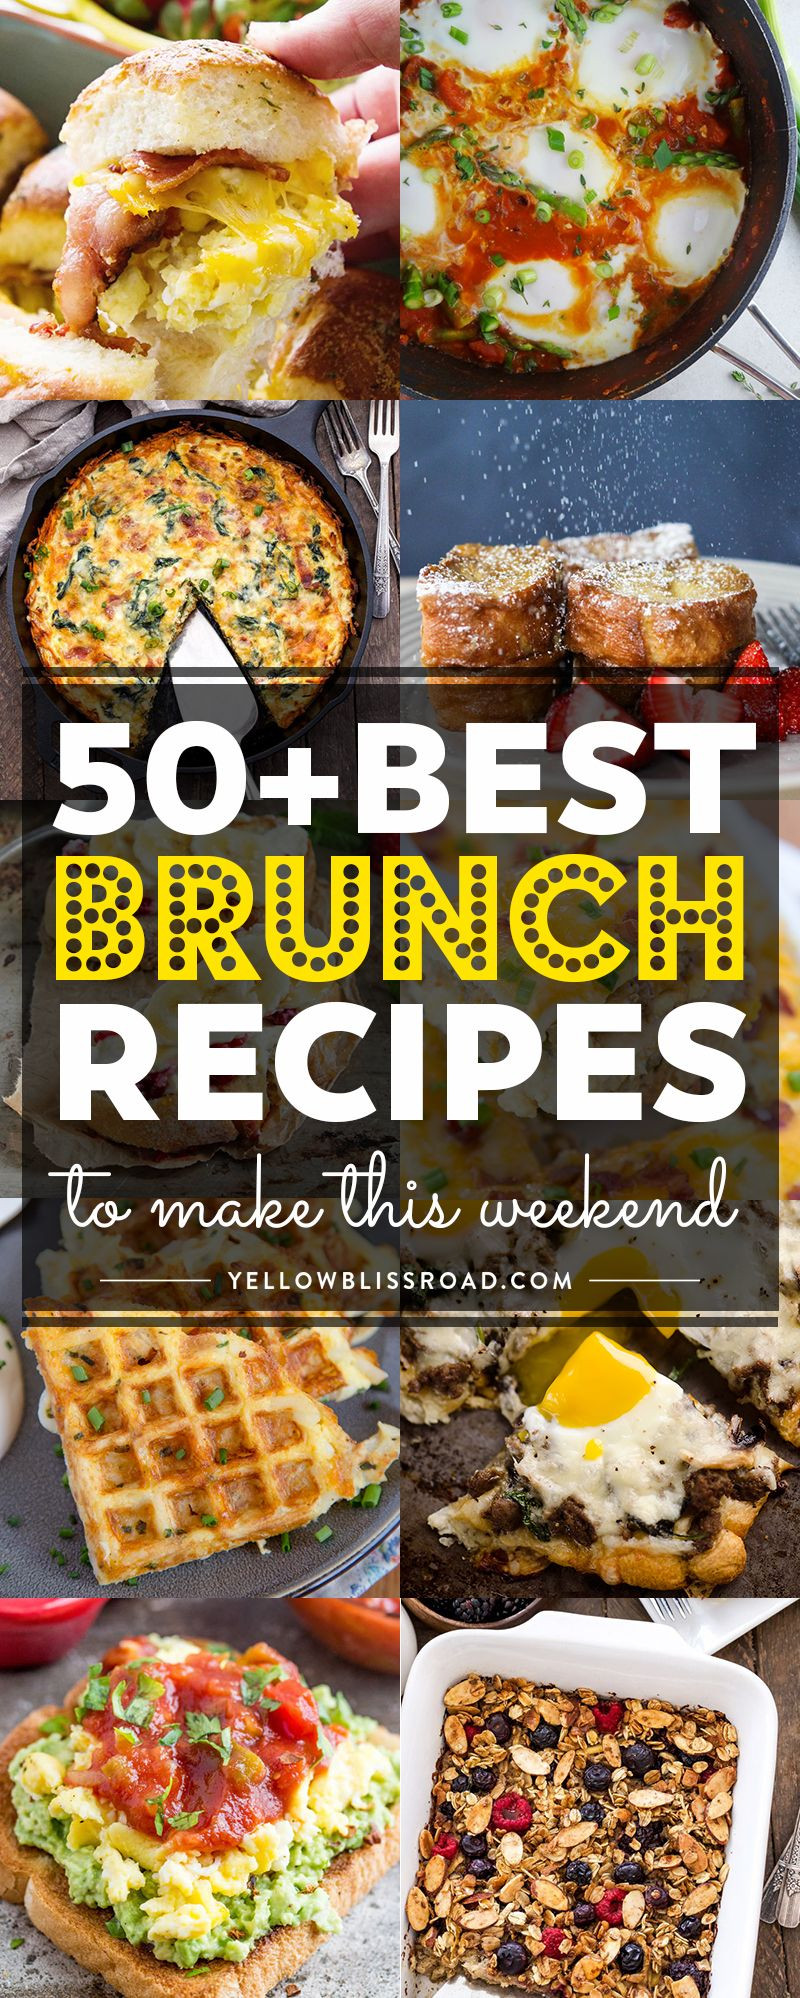 Brunch Food Ideas For A Party
 50 of the Best Brunch Recipes to Make this Weekend